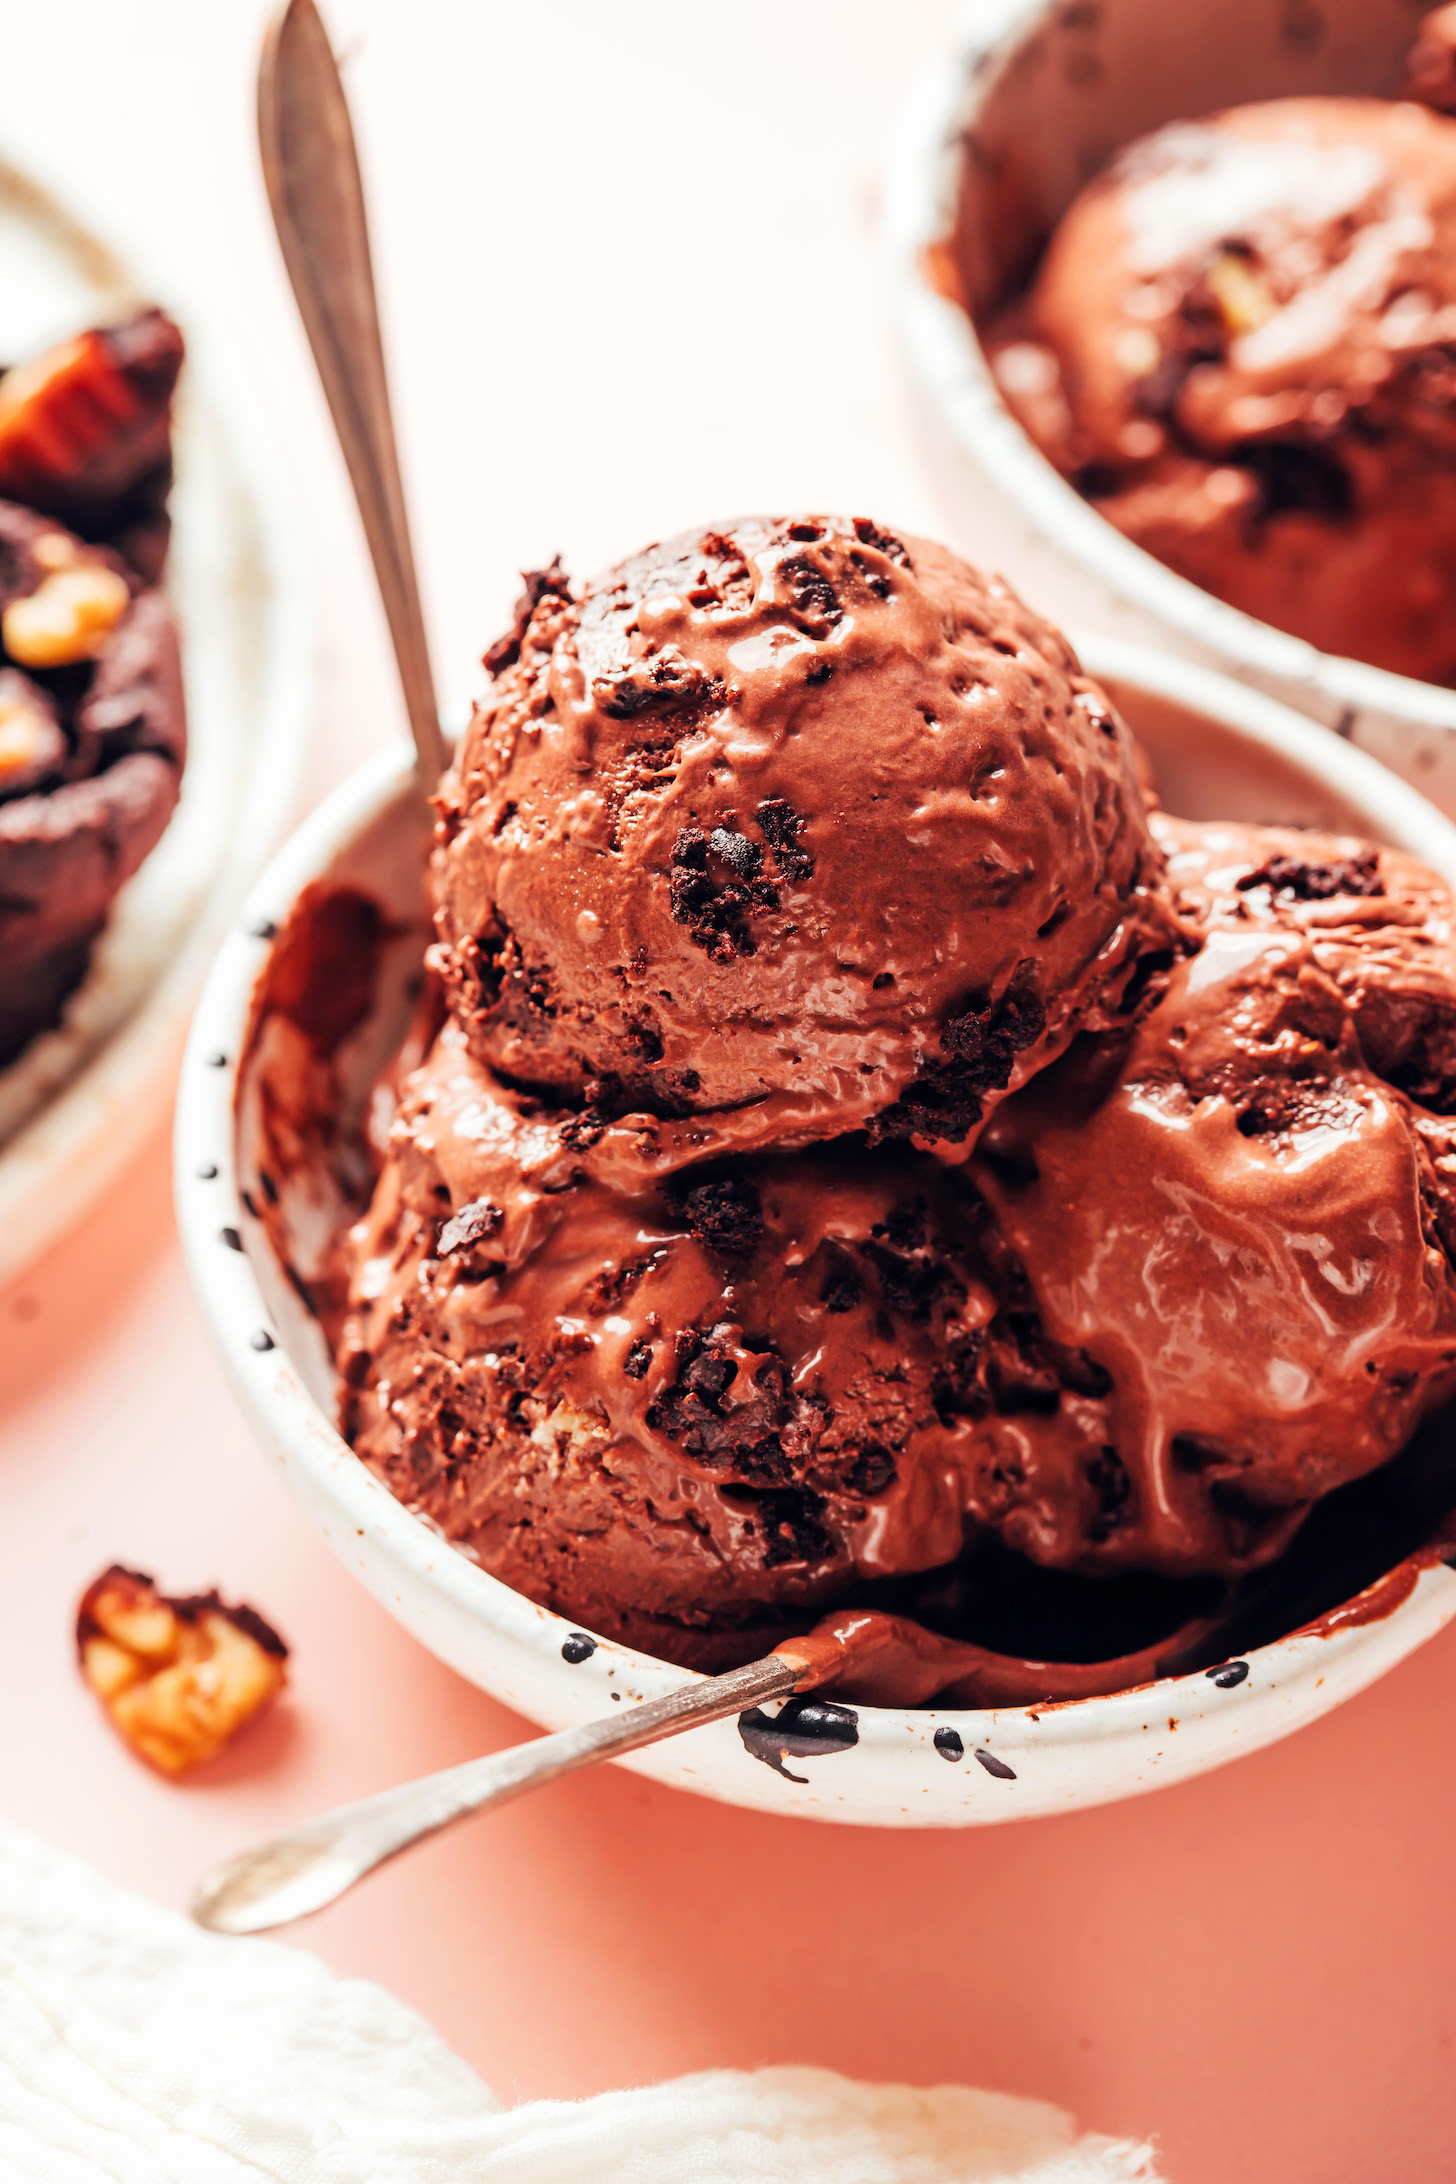 Bowl filled with scoops of our Vegan Brownie Chocolate Ice Cream recipe